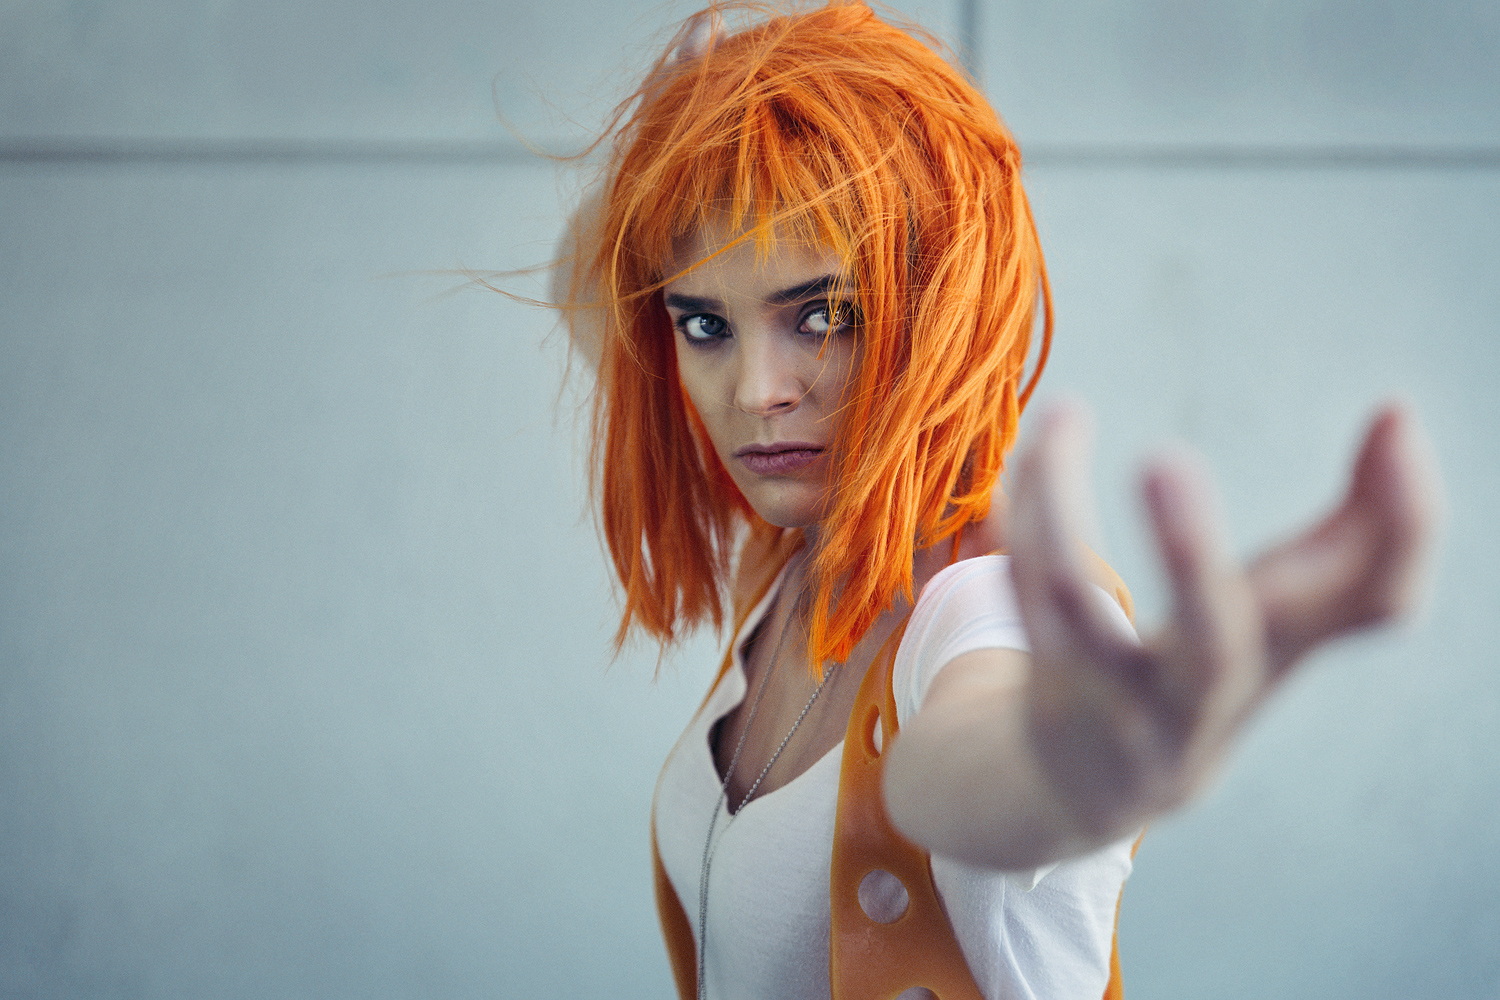 Lacey Berggren as Leeloo of The Fifth Element